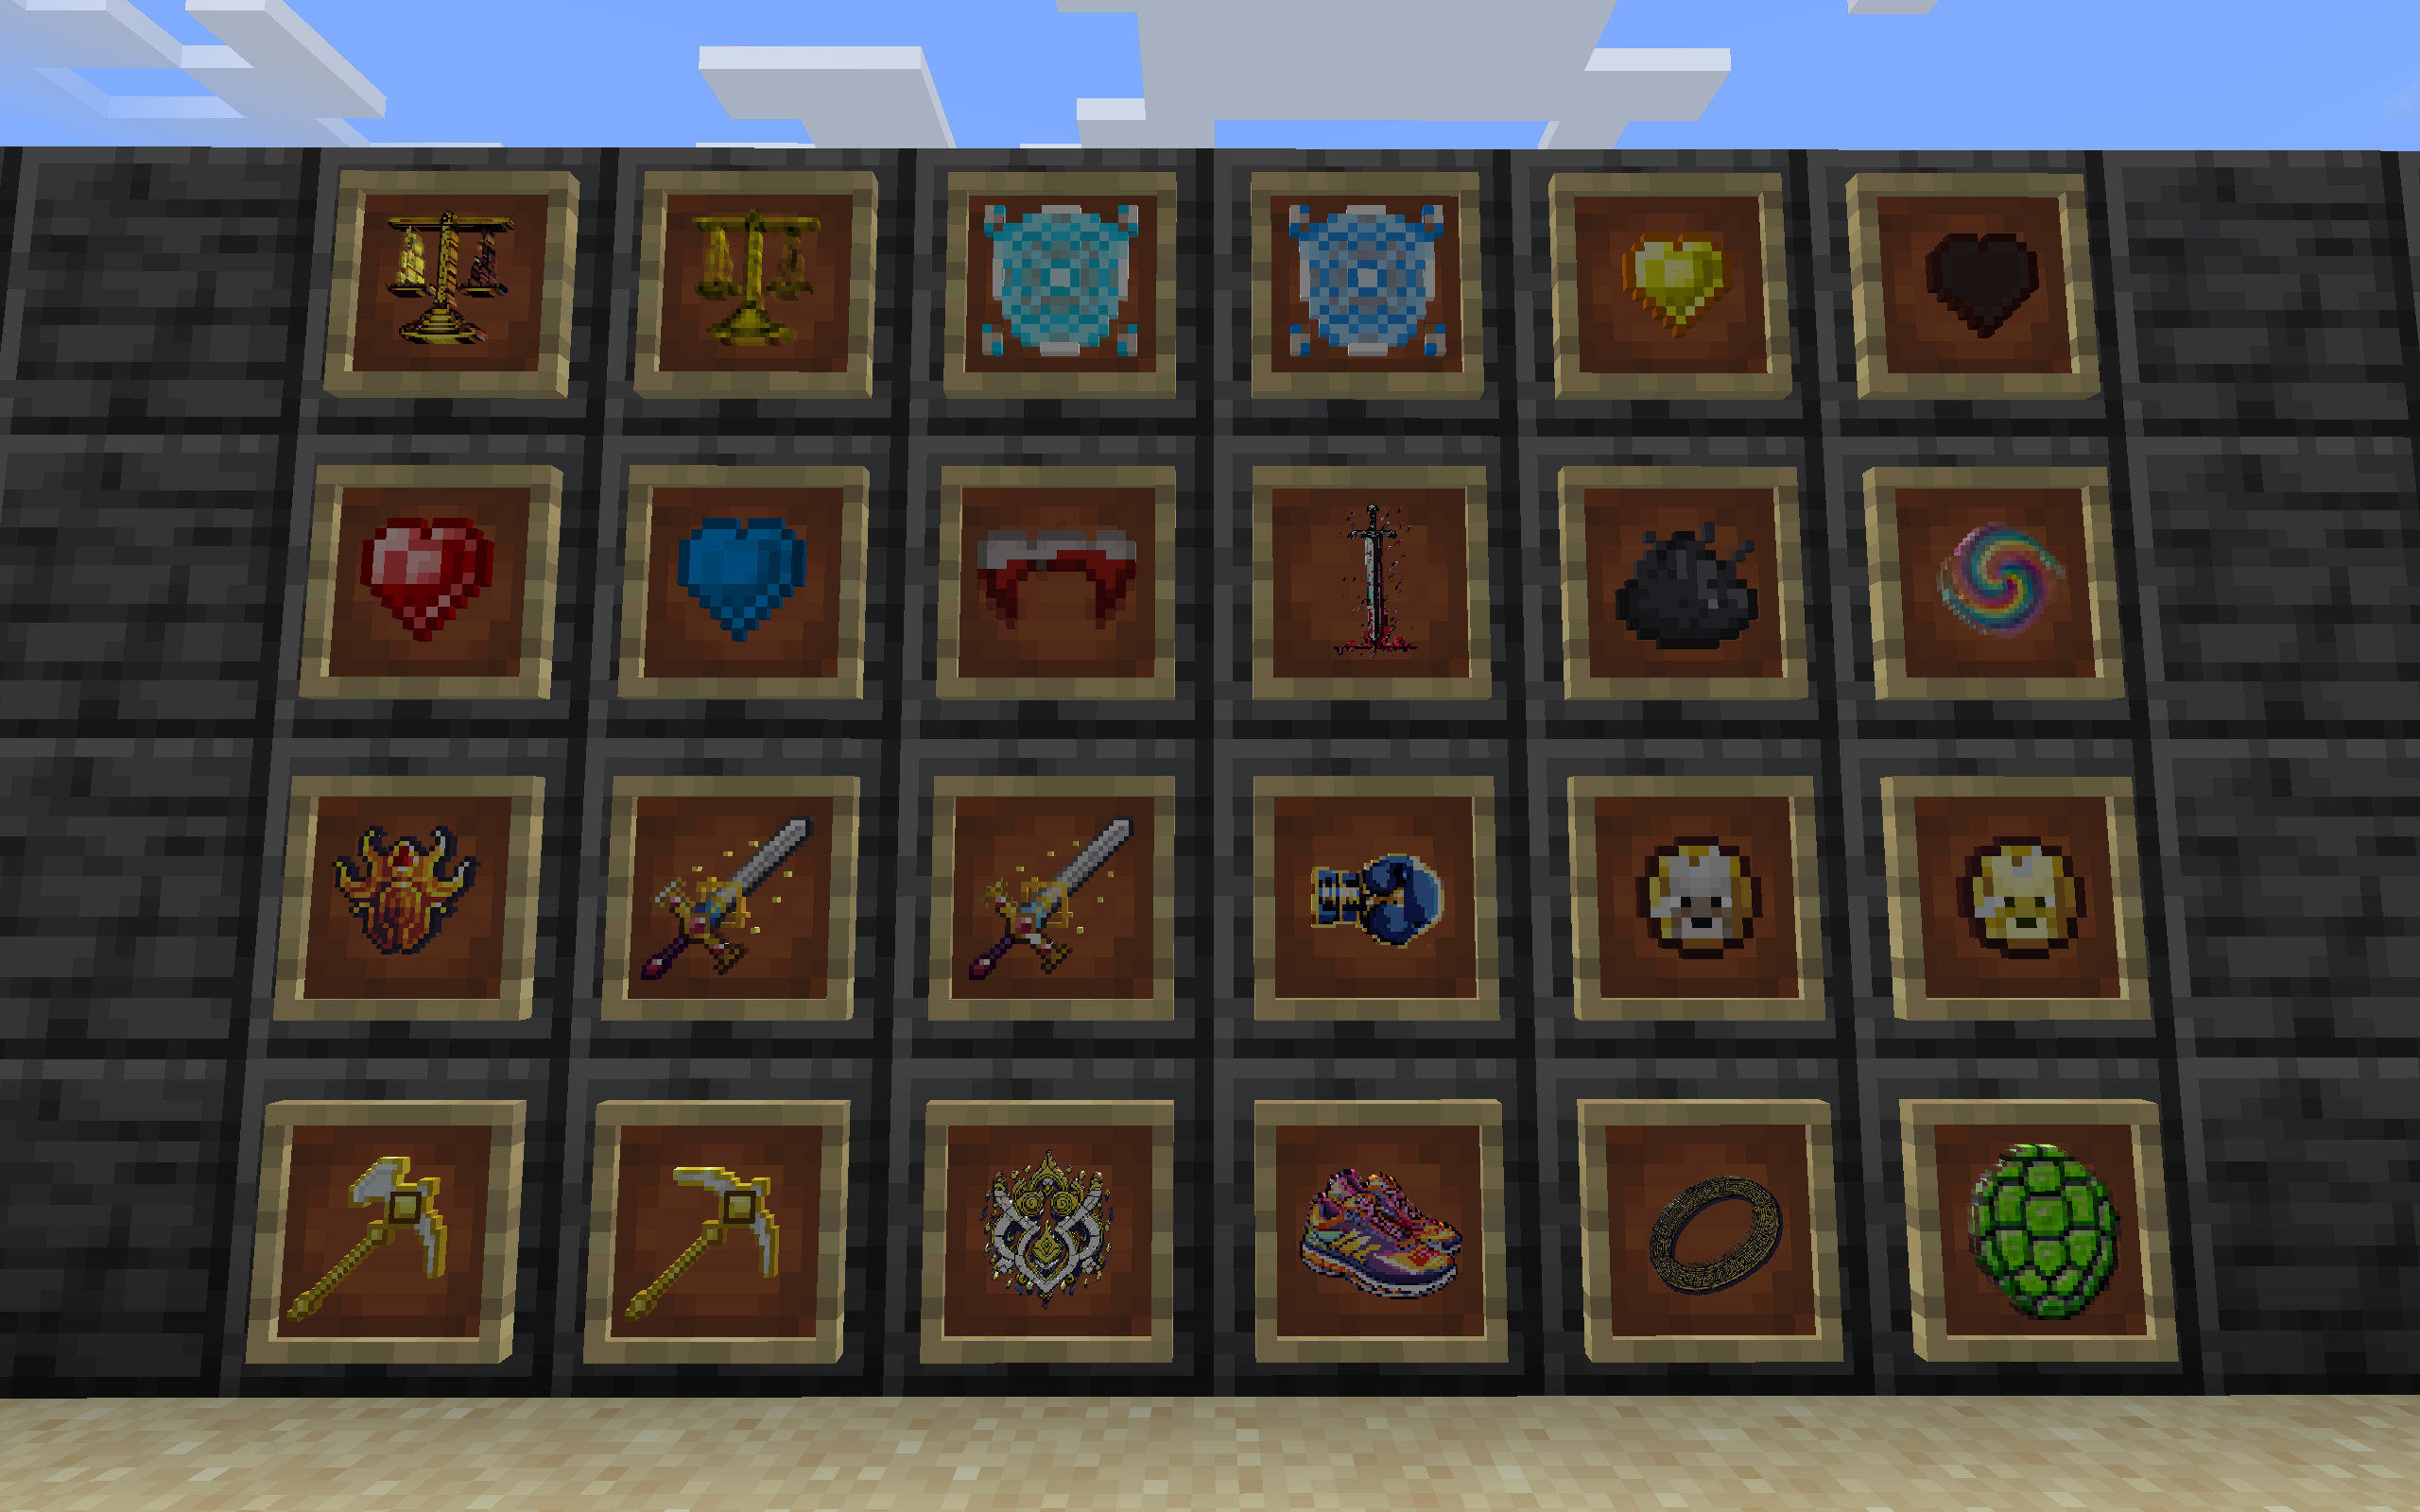 A picture that arranges all the items in the current module.